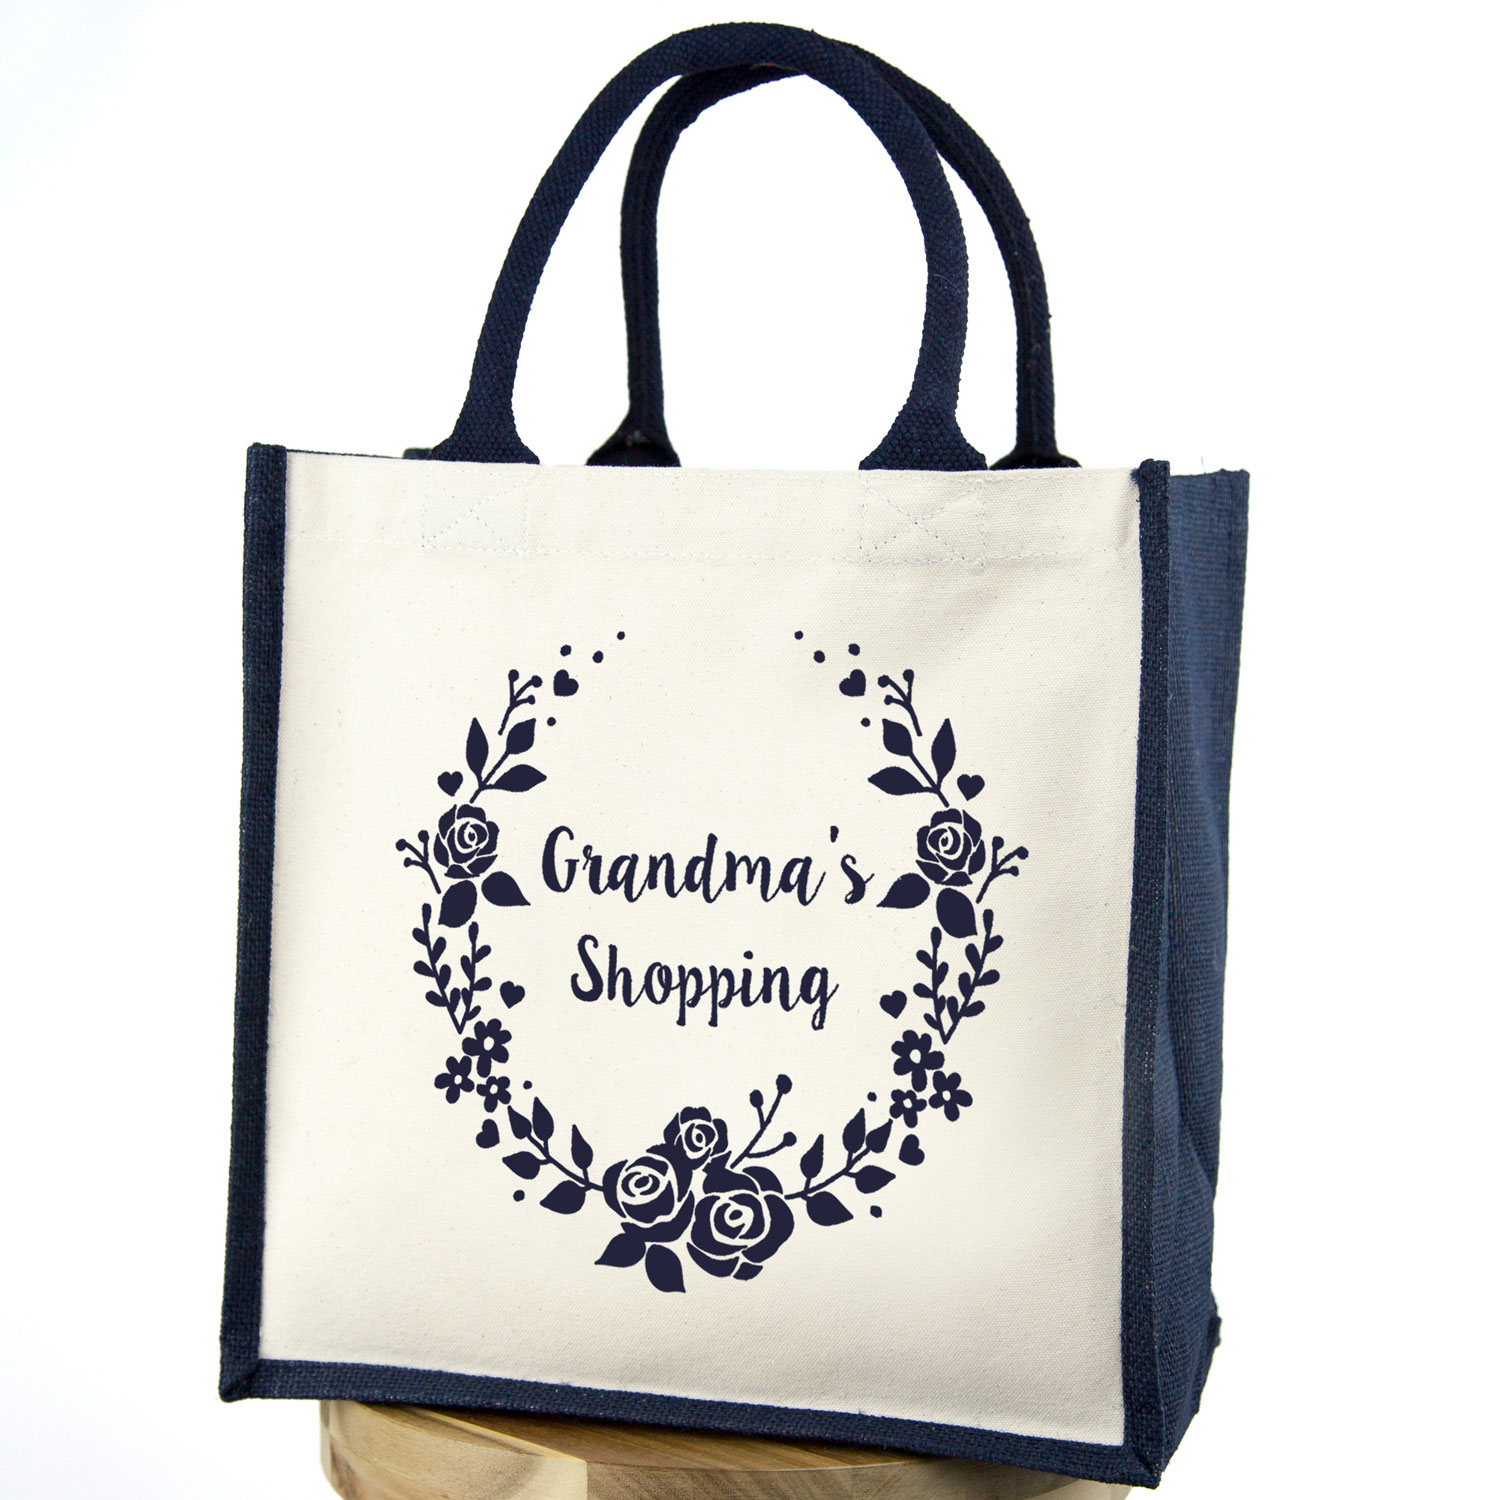 Personalised wreath shopping canvas bag | Gifts for grandparents | UK